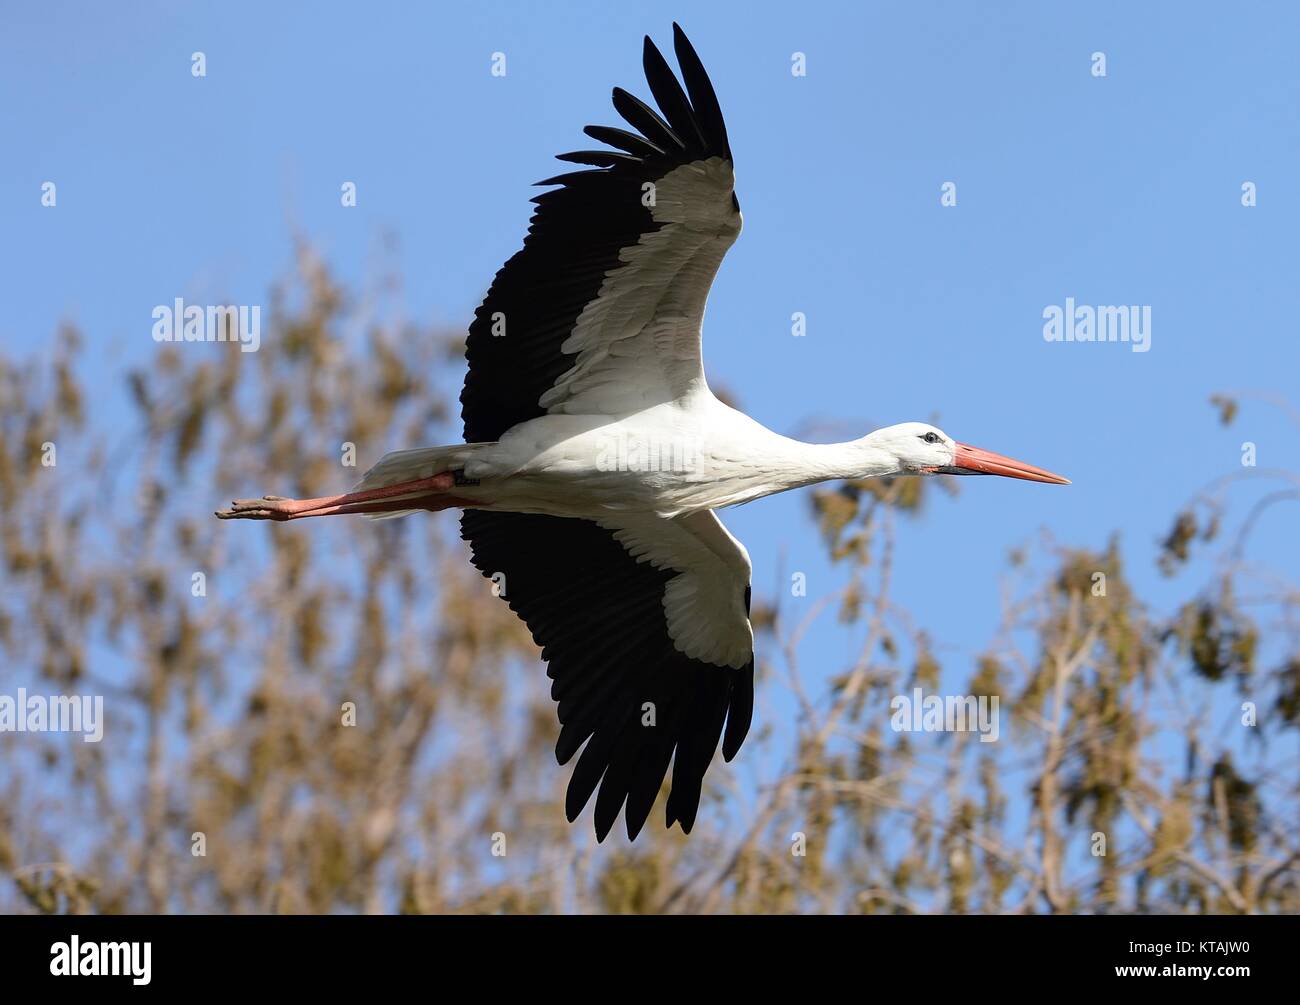 white stork in flight with trees in the background Stock Photo